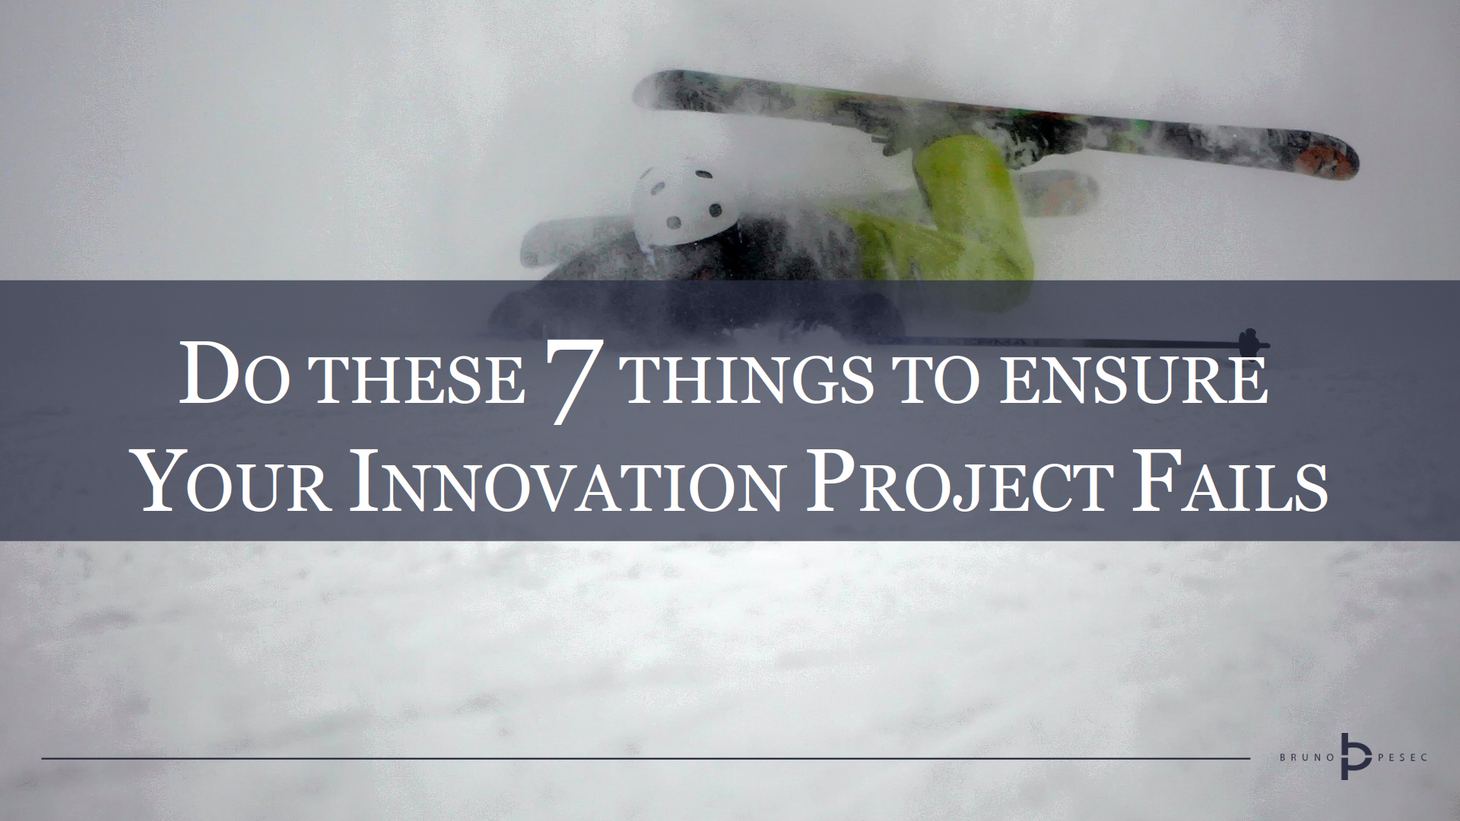 Do these 7 things to ensure your innovation project fails